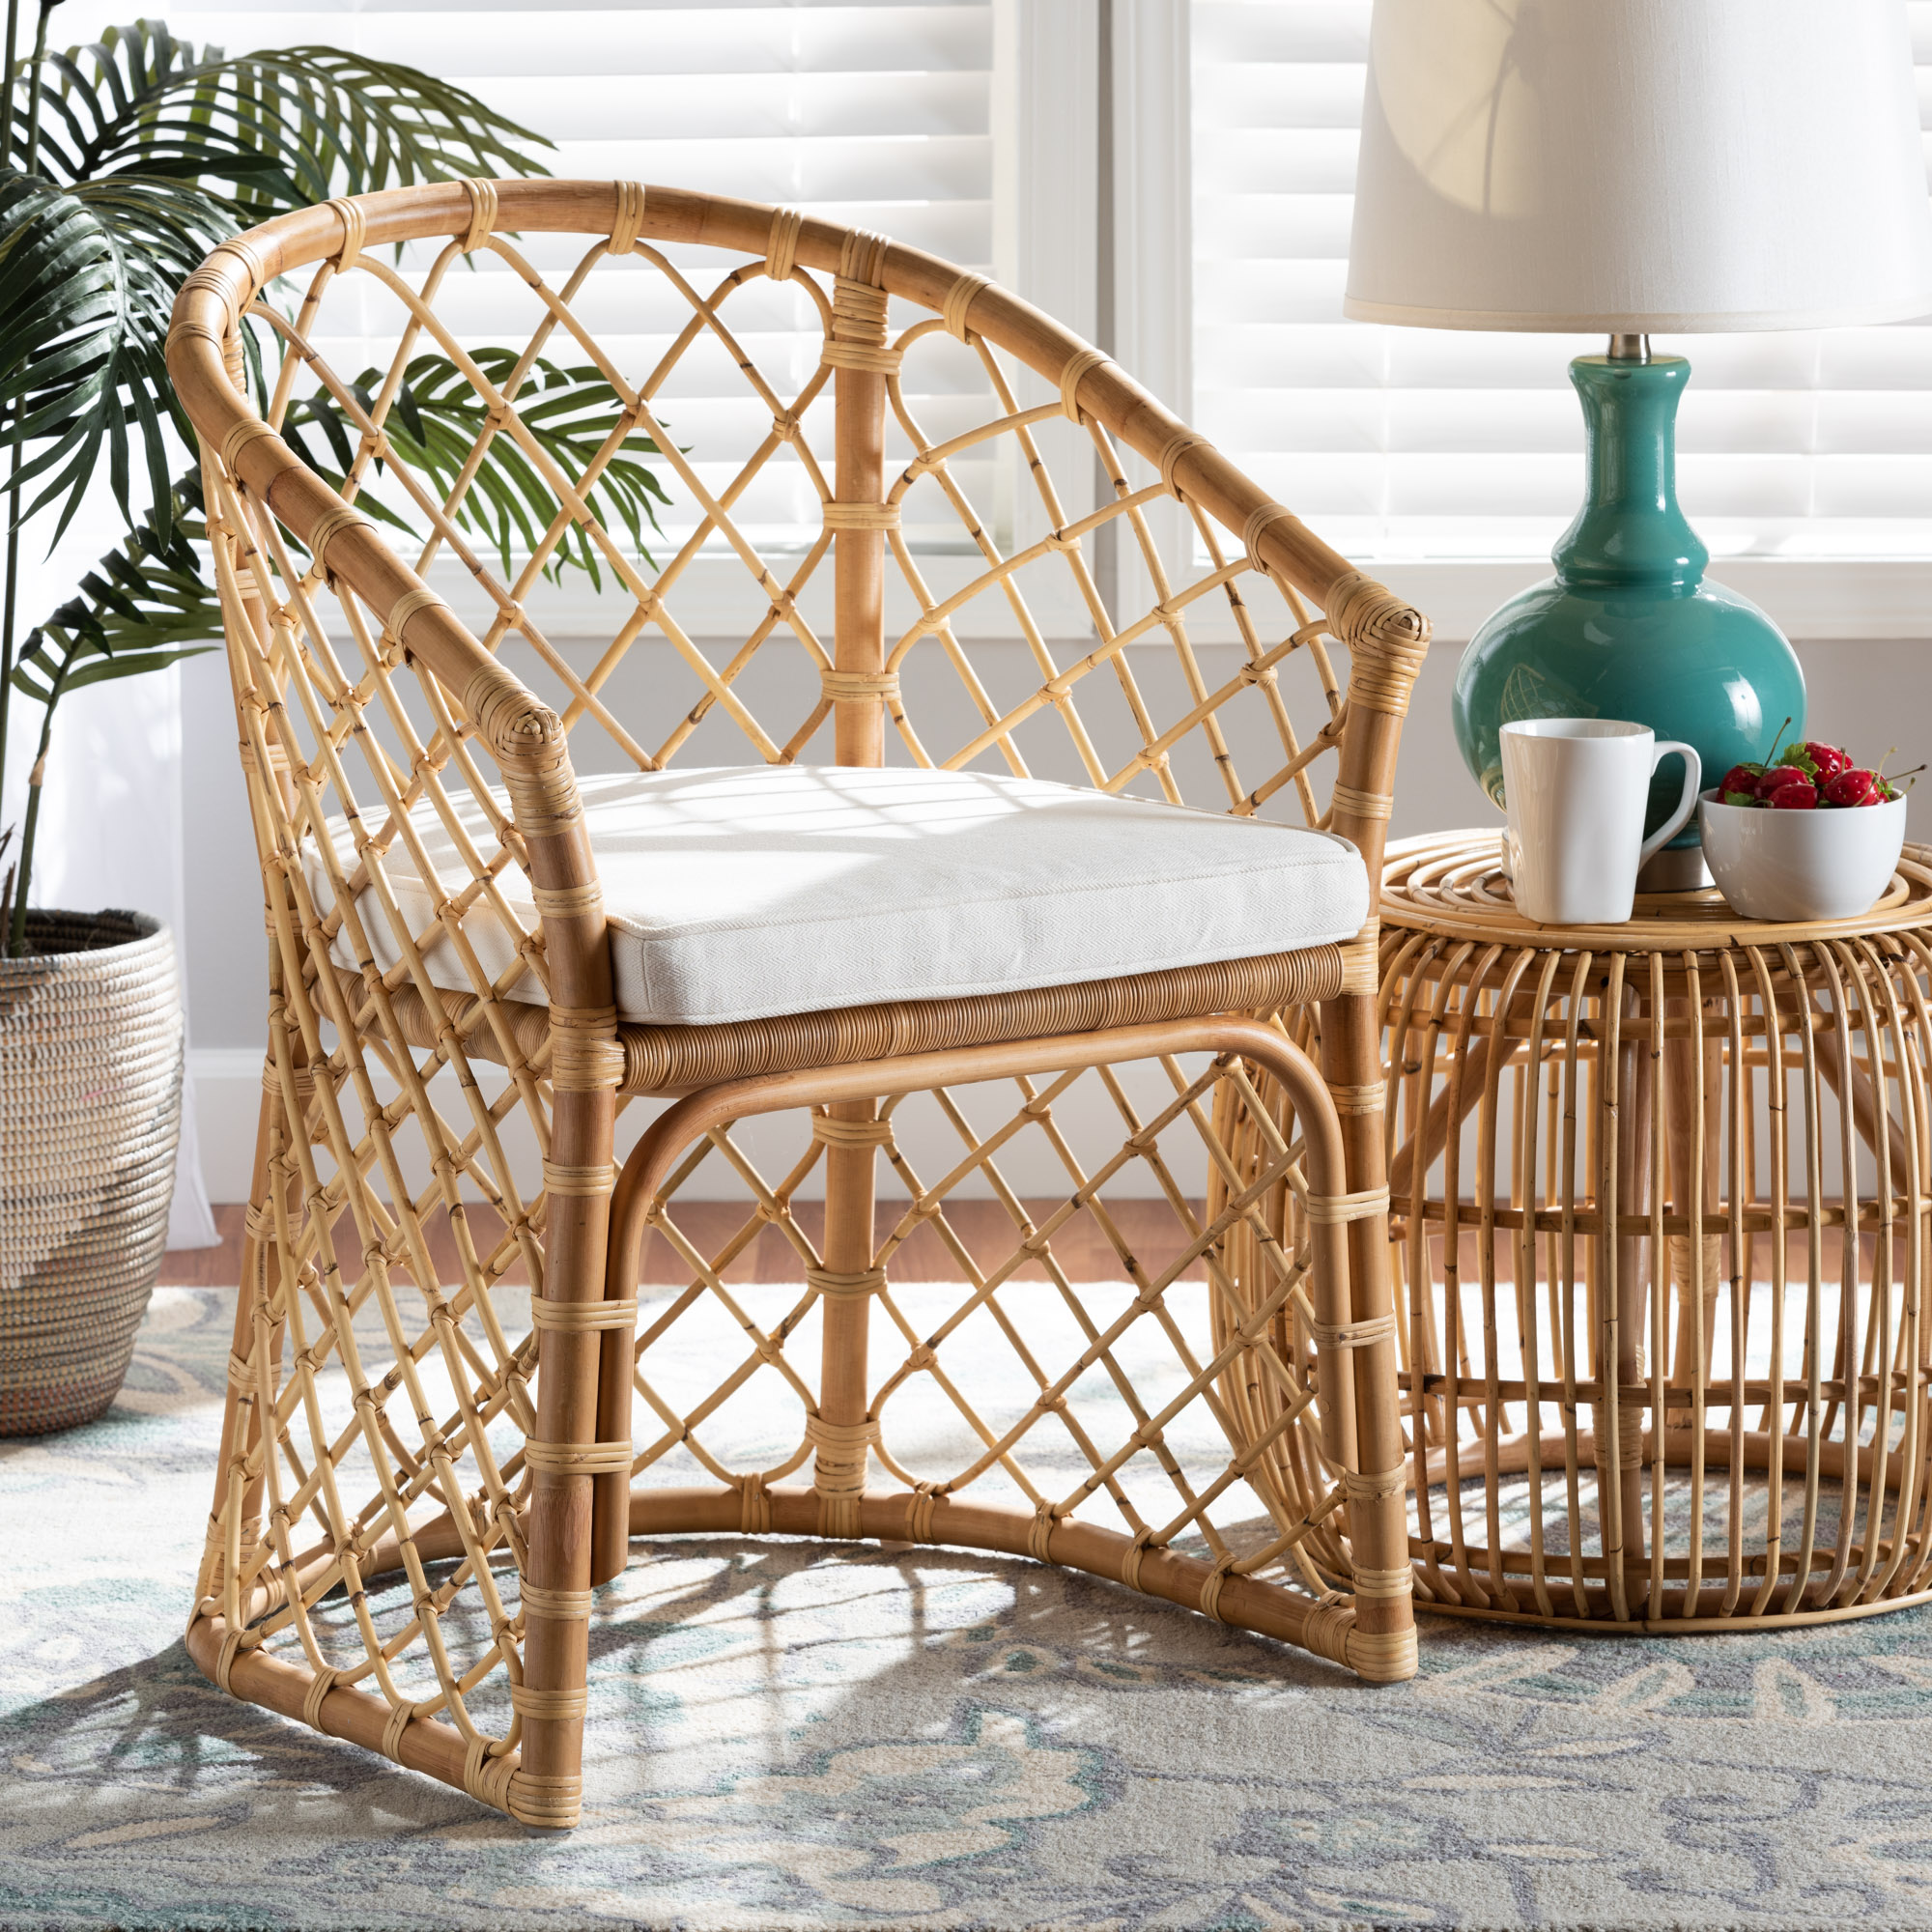 bali & pari Orchard Modern Bohemian White Fabric Upholstered and Natural Brown Rattan Dining Chair - image 1 of 10